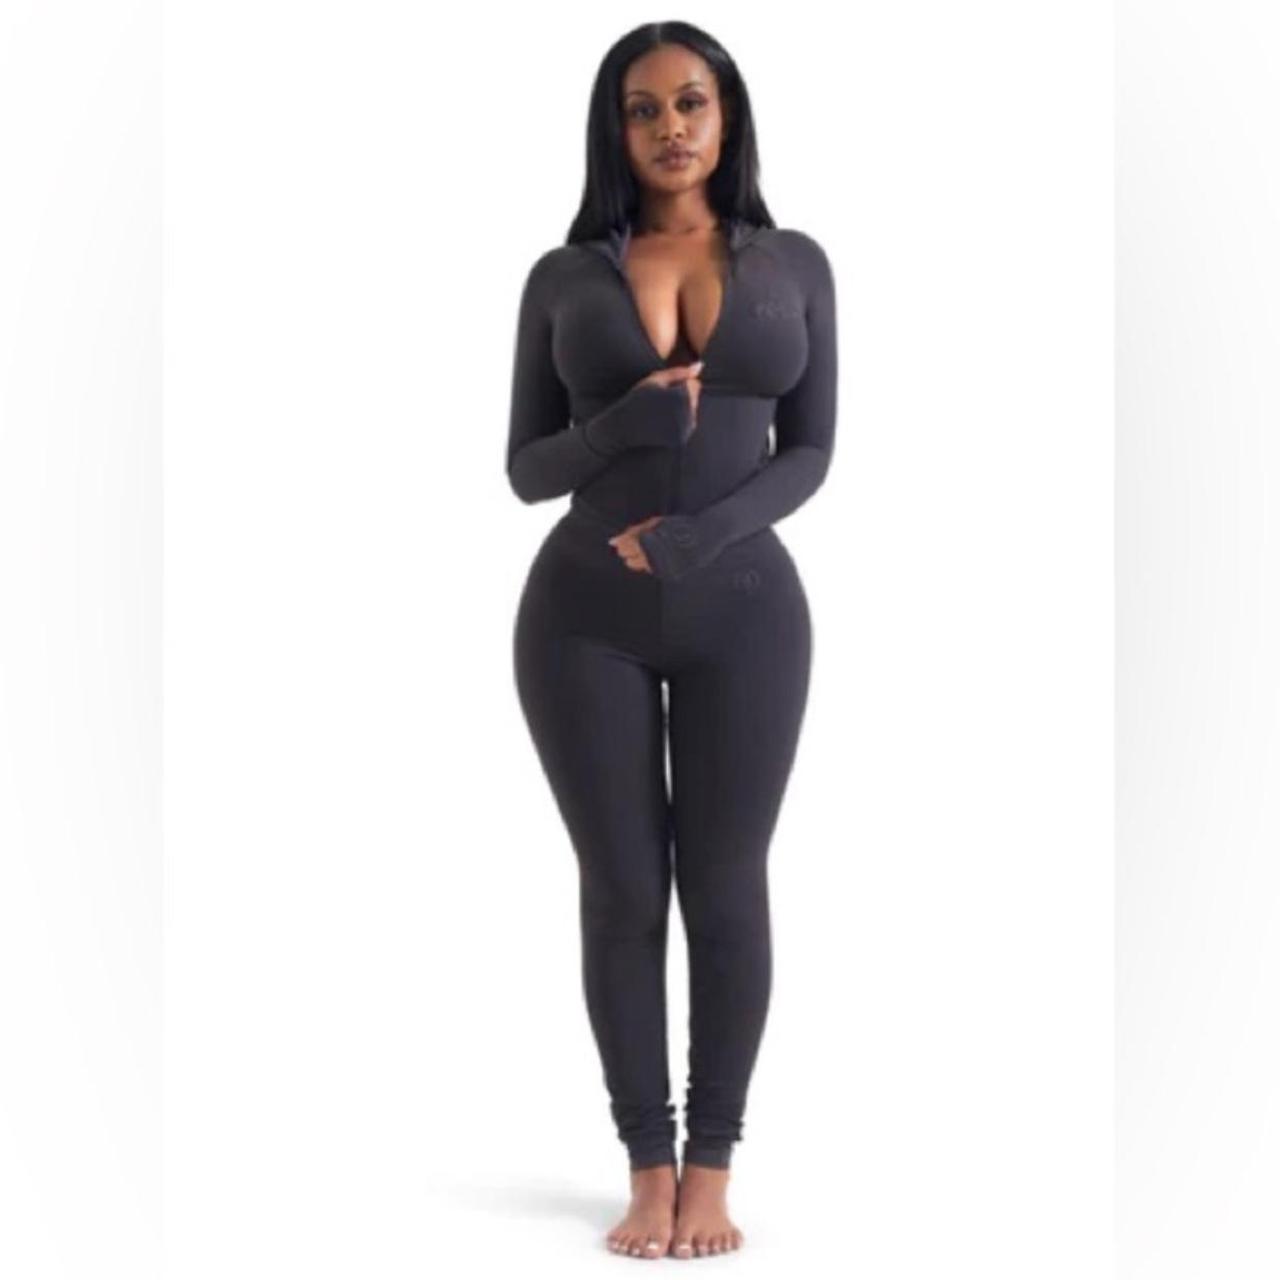 skims sheer sculpt catsuit in clay size xs worn - Depop